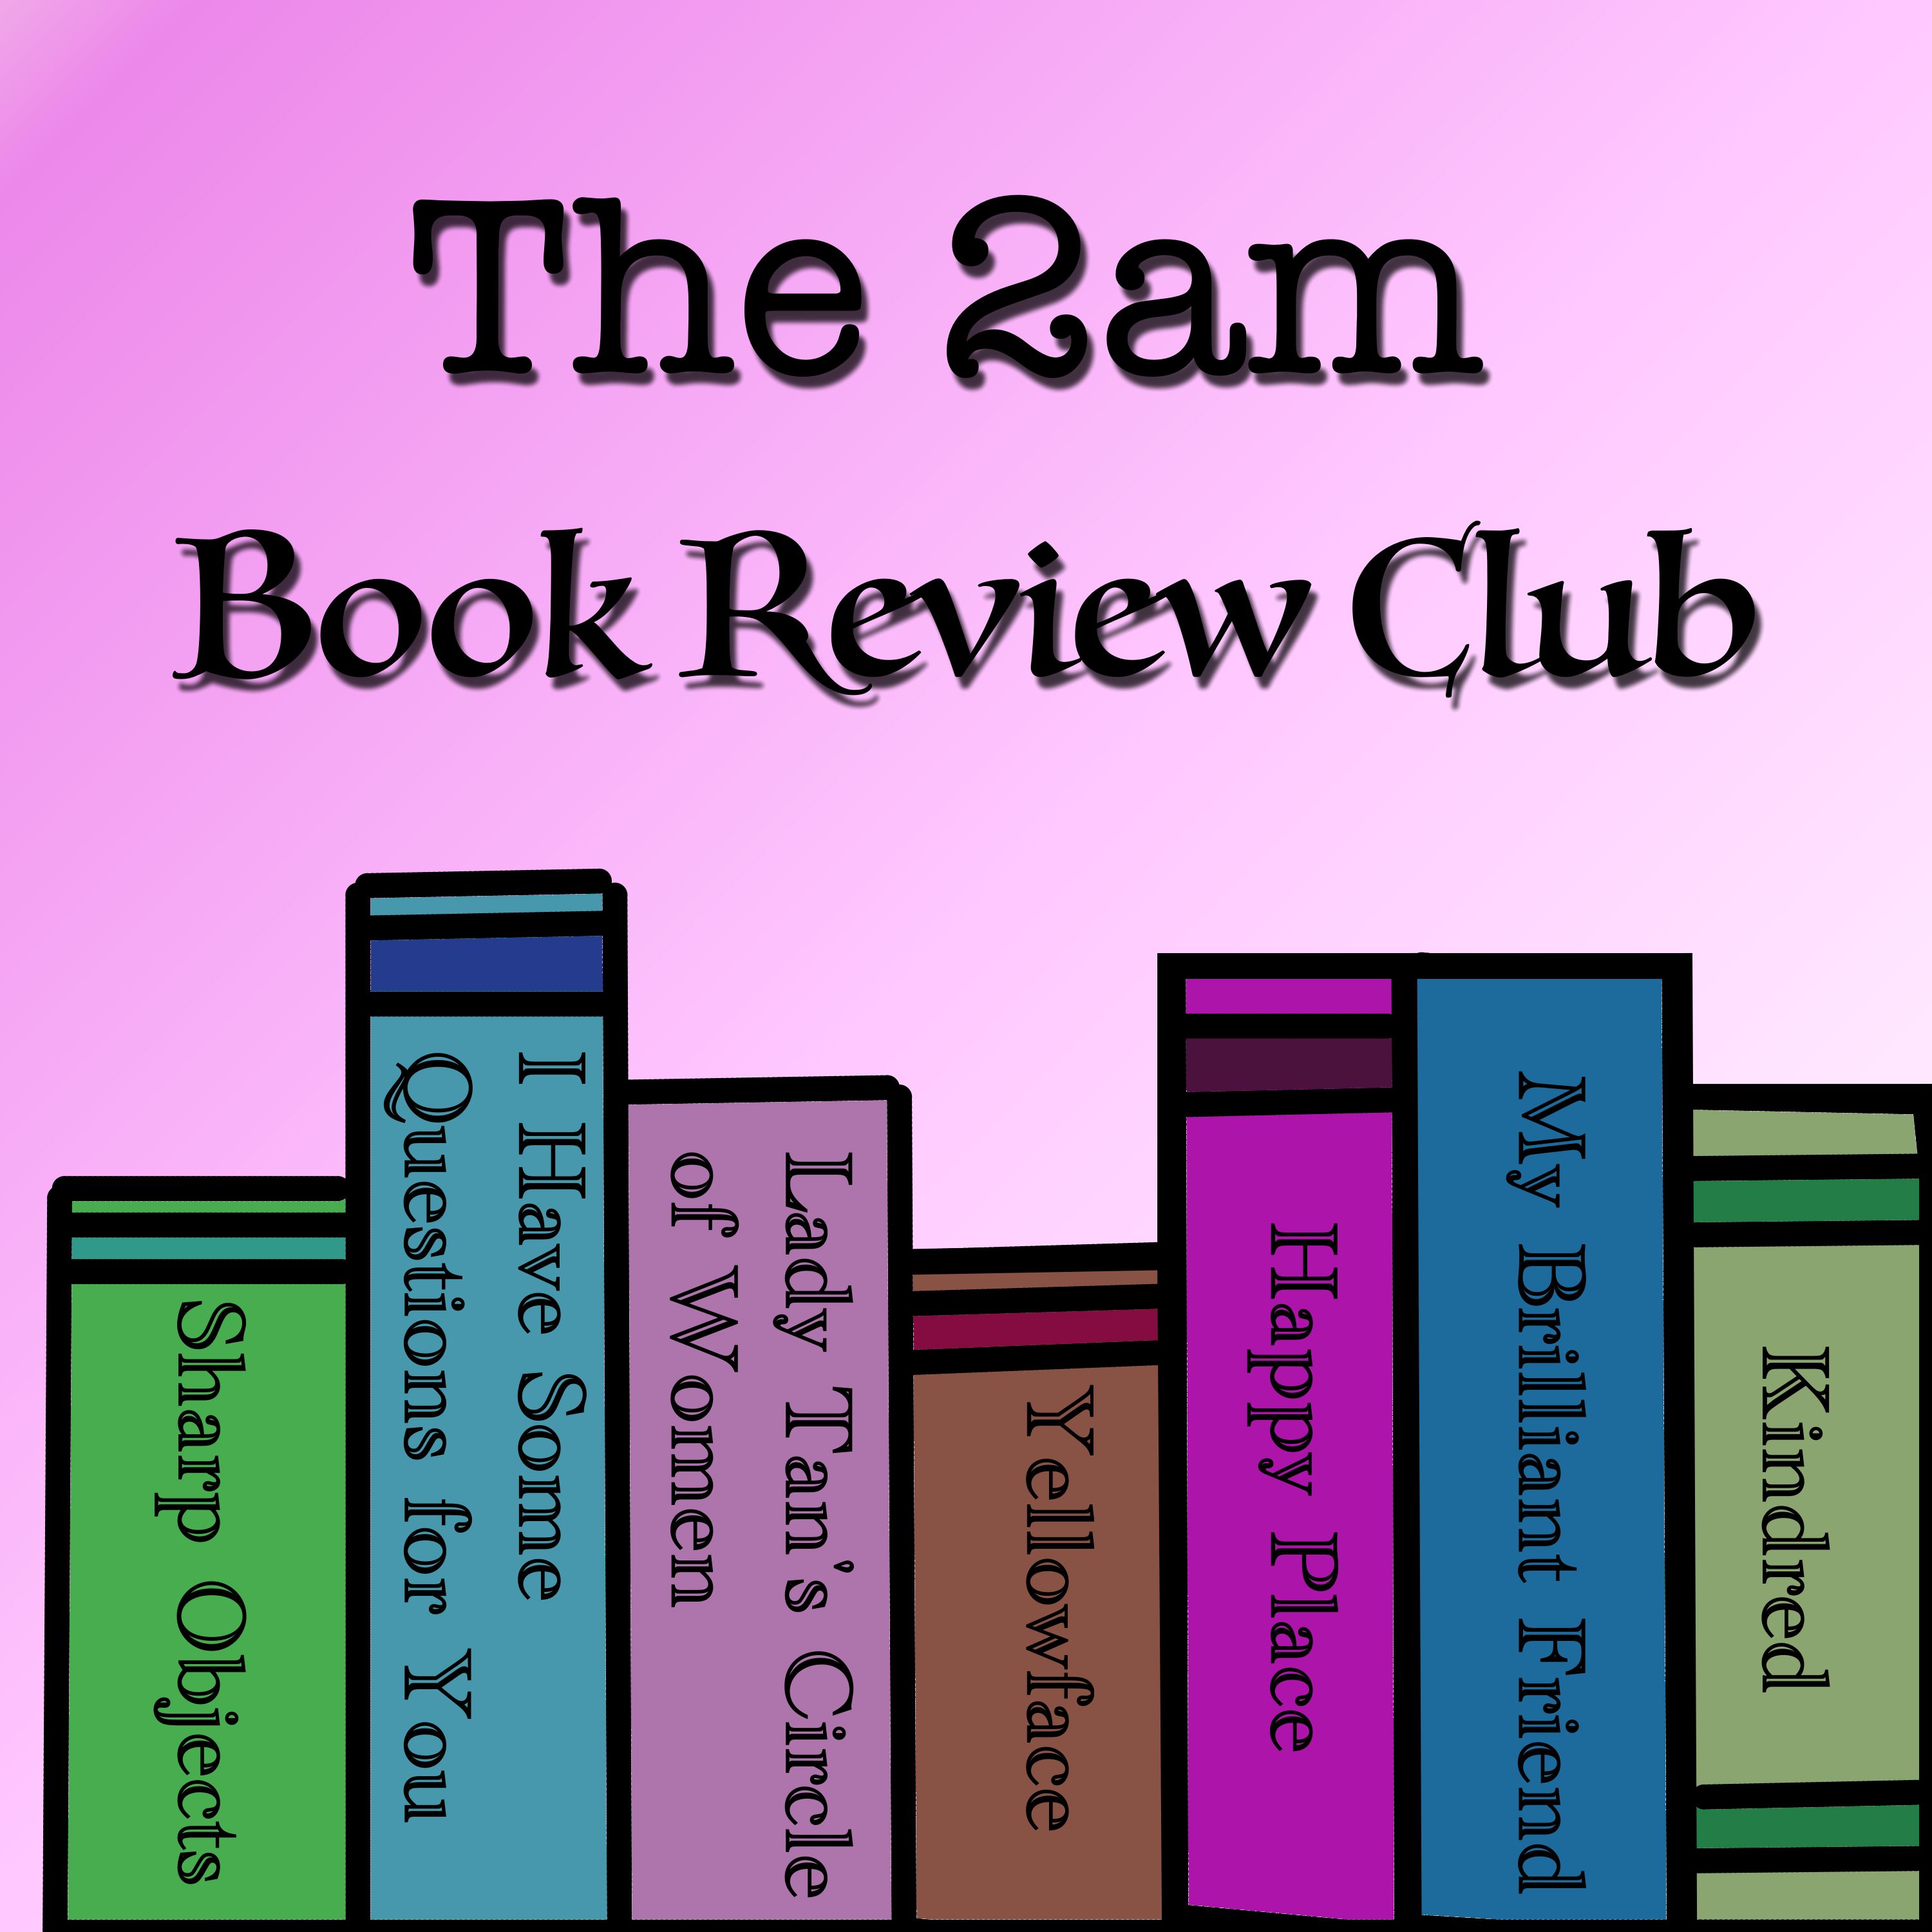 Artwork for The 2am Book Review Club